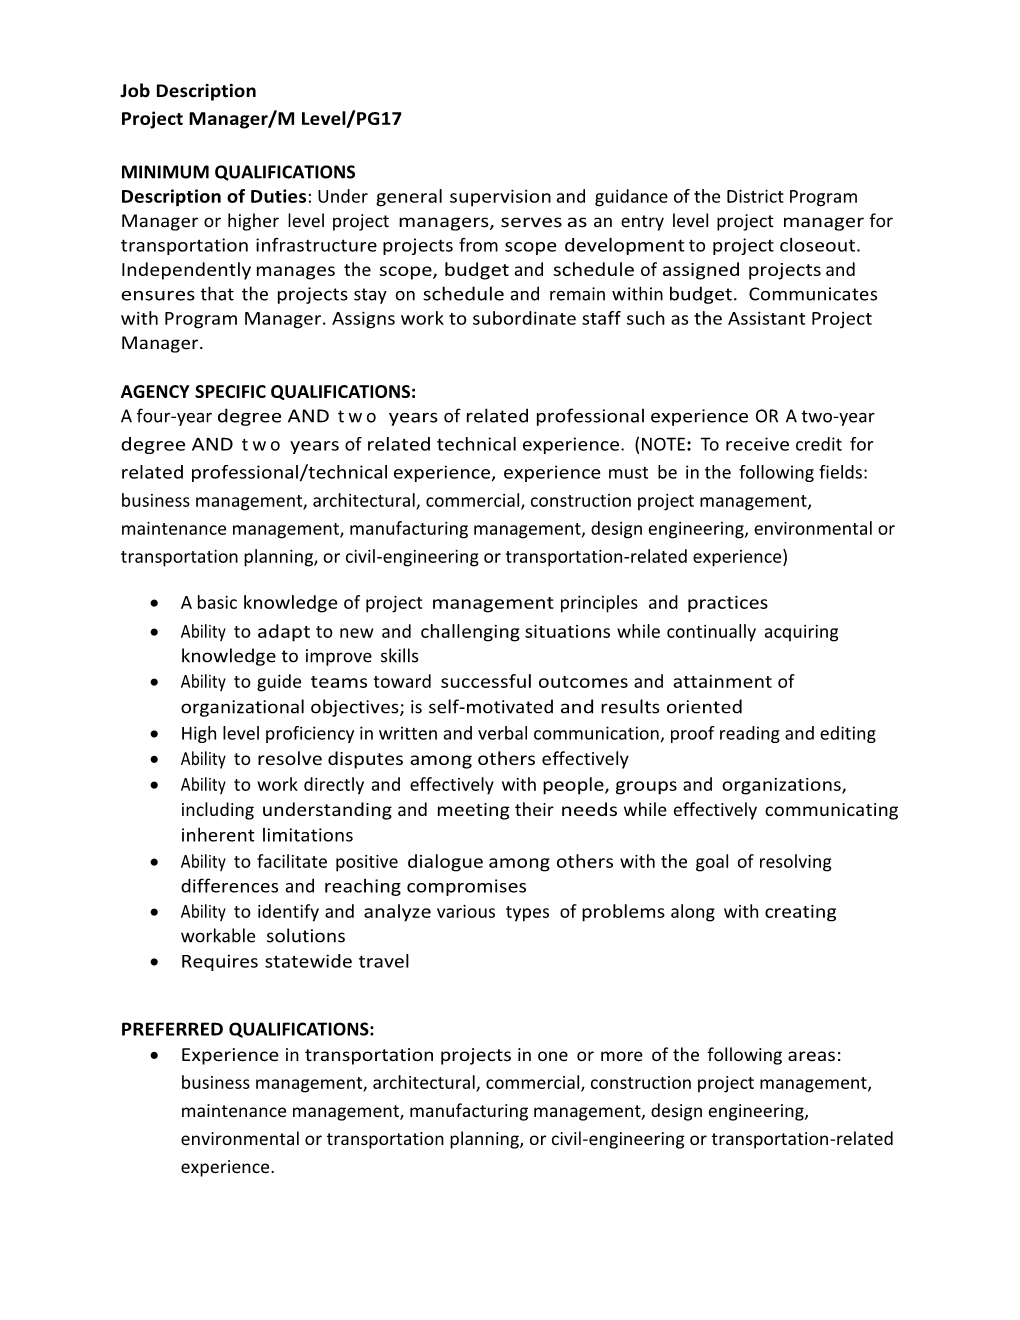 Project Manager/M Level/PG17